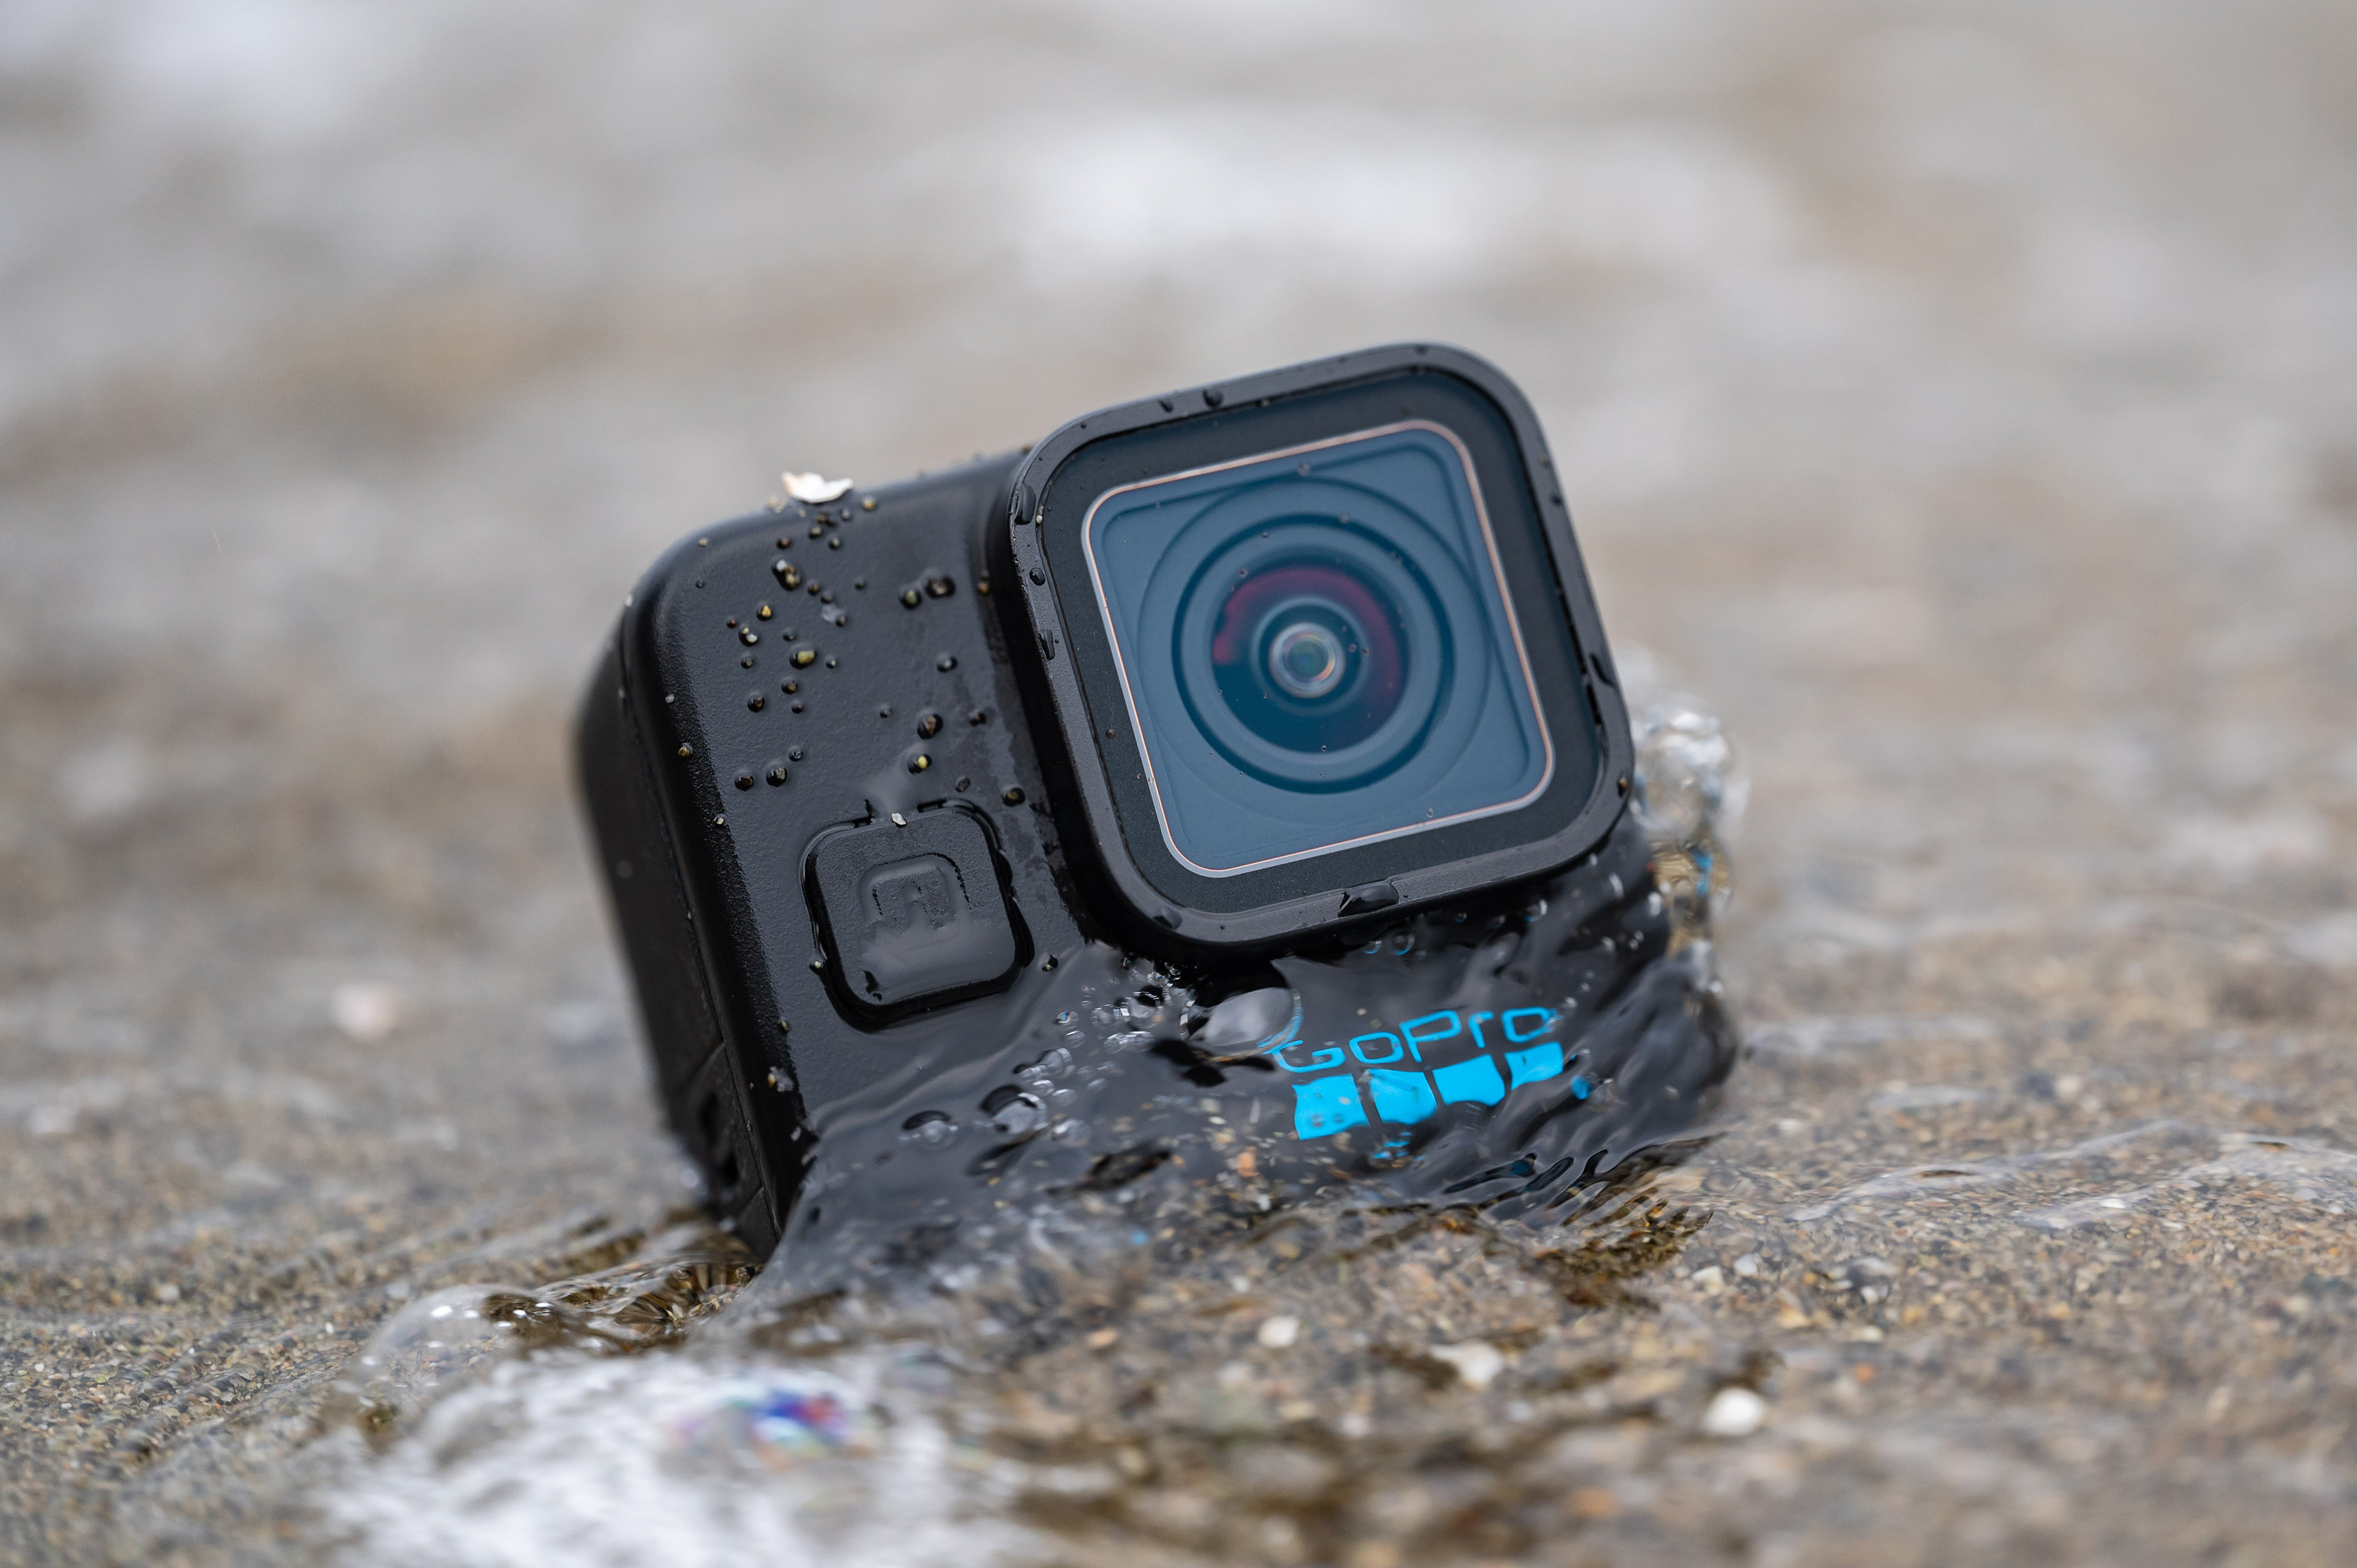 GoPro Hero 12 Black vs Hero 11 Black: Which action camera is right